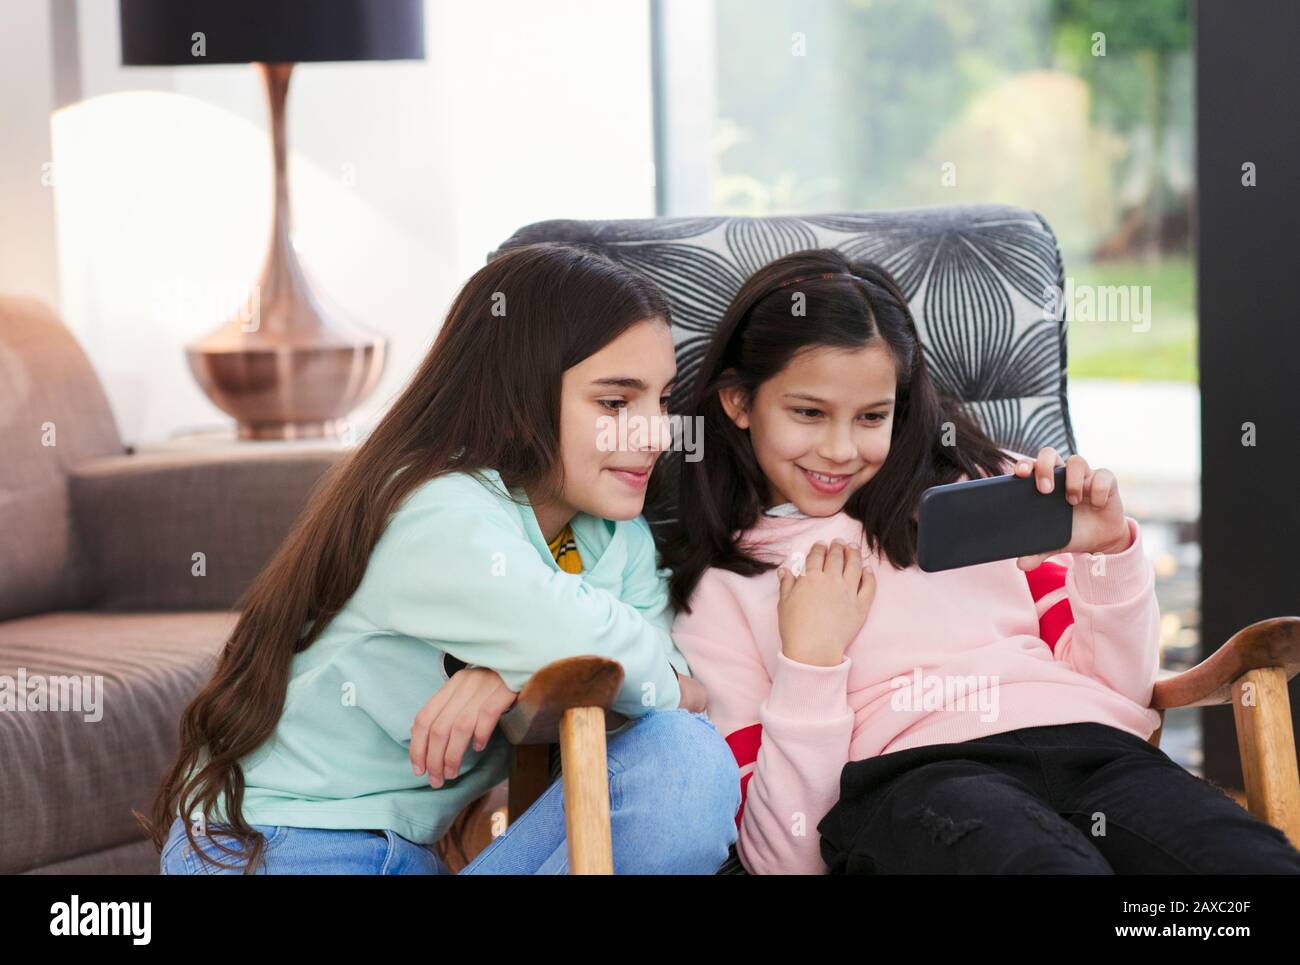 Sisters using smart phone in living room Stock Photo